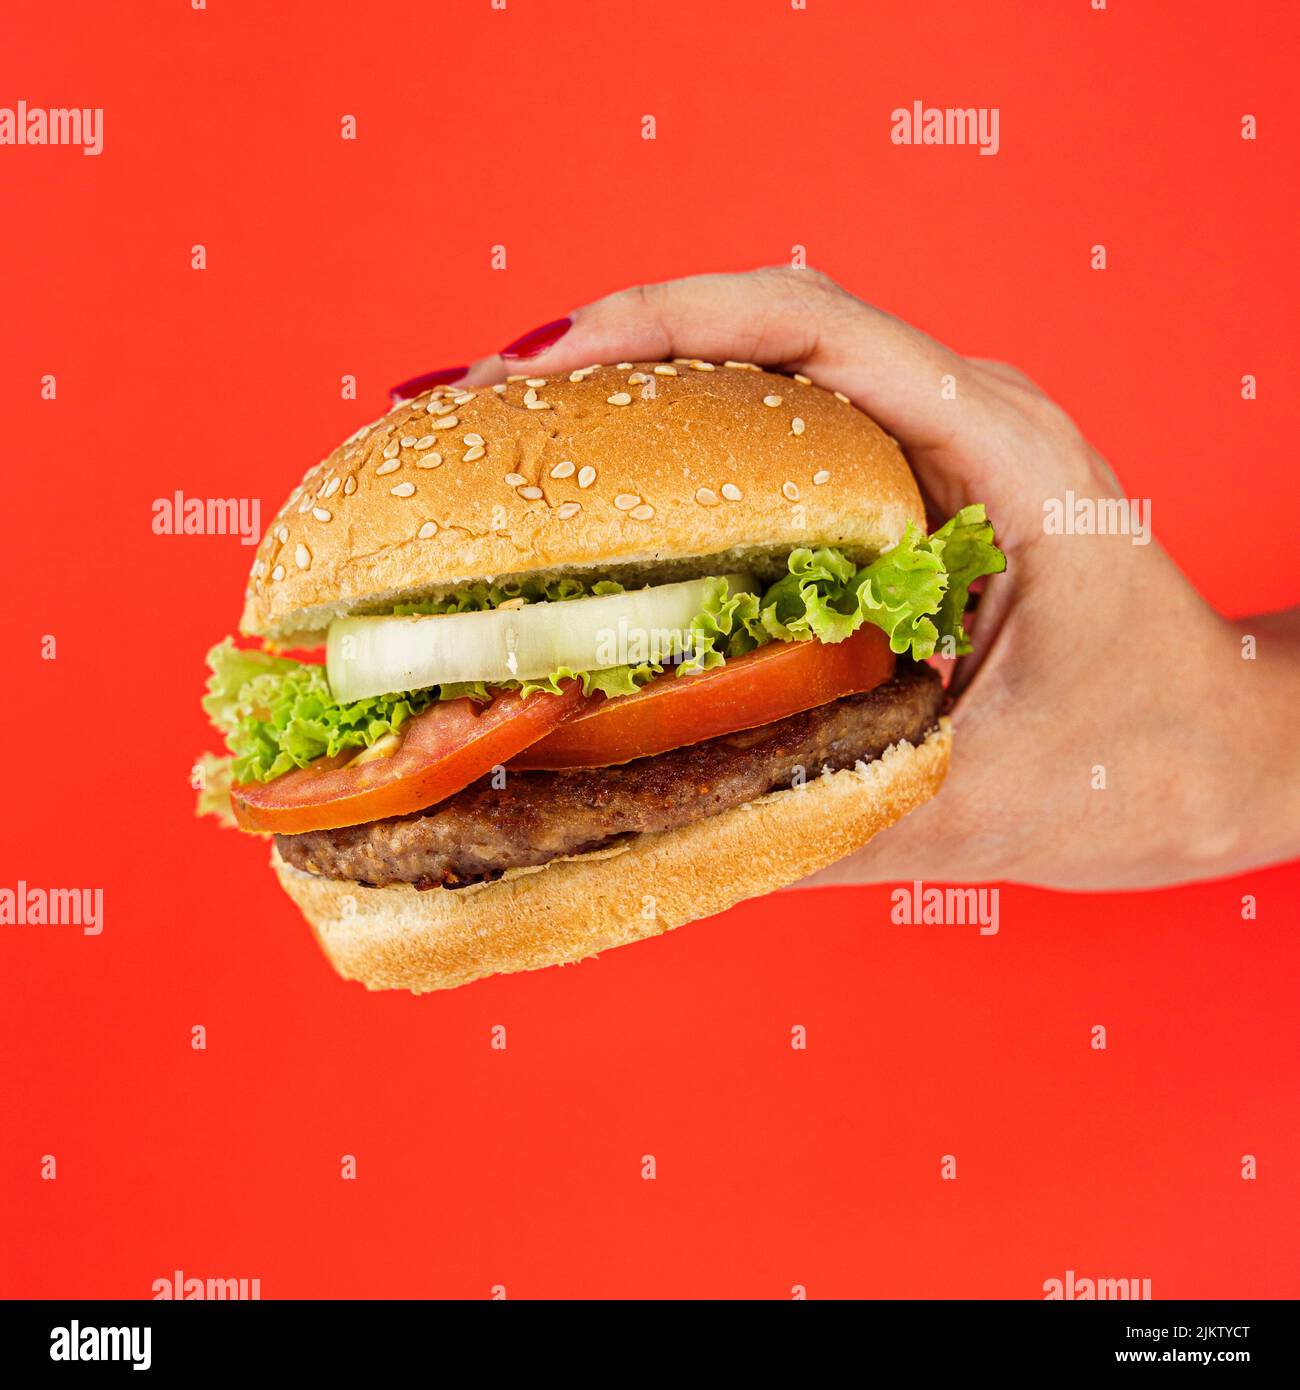 woman hand holding a grilled hamburger on a red background Stock Photo